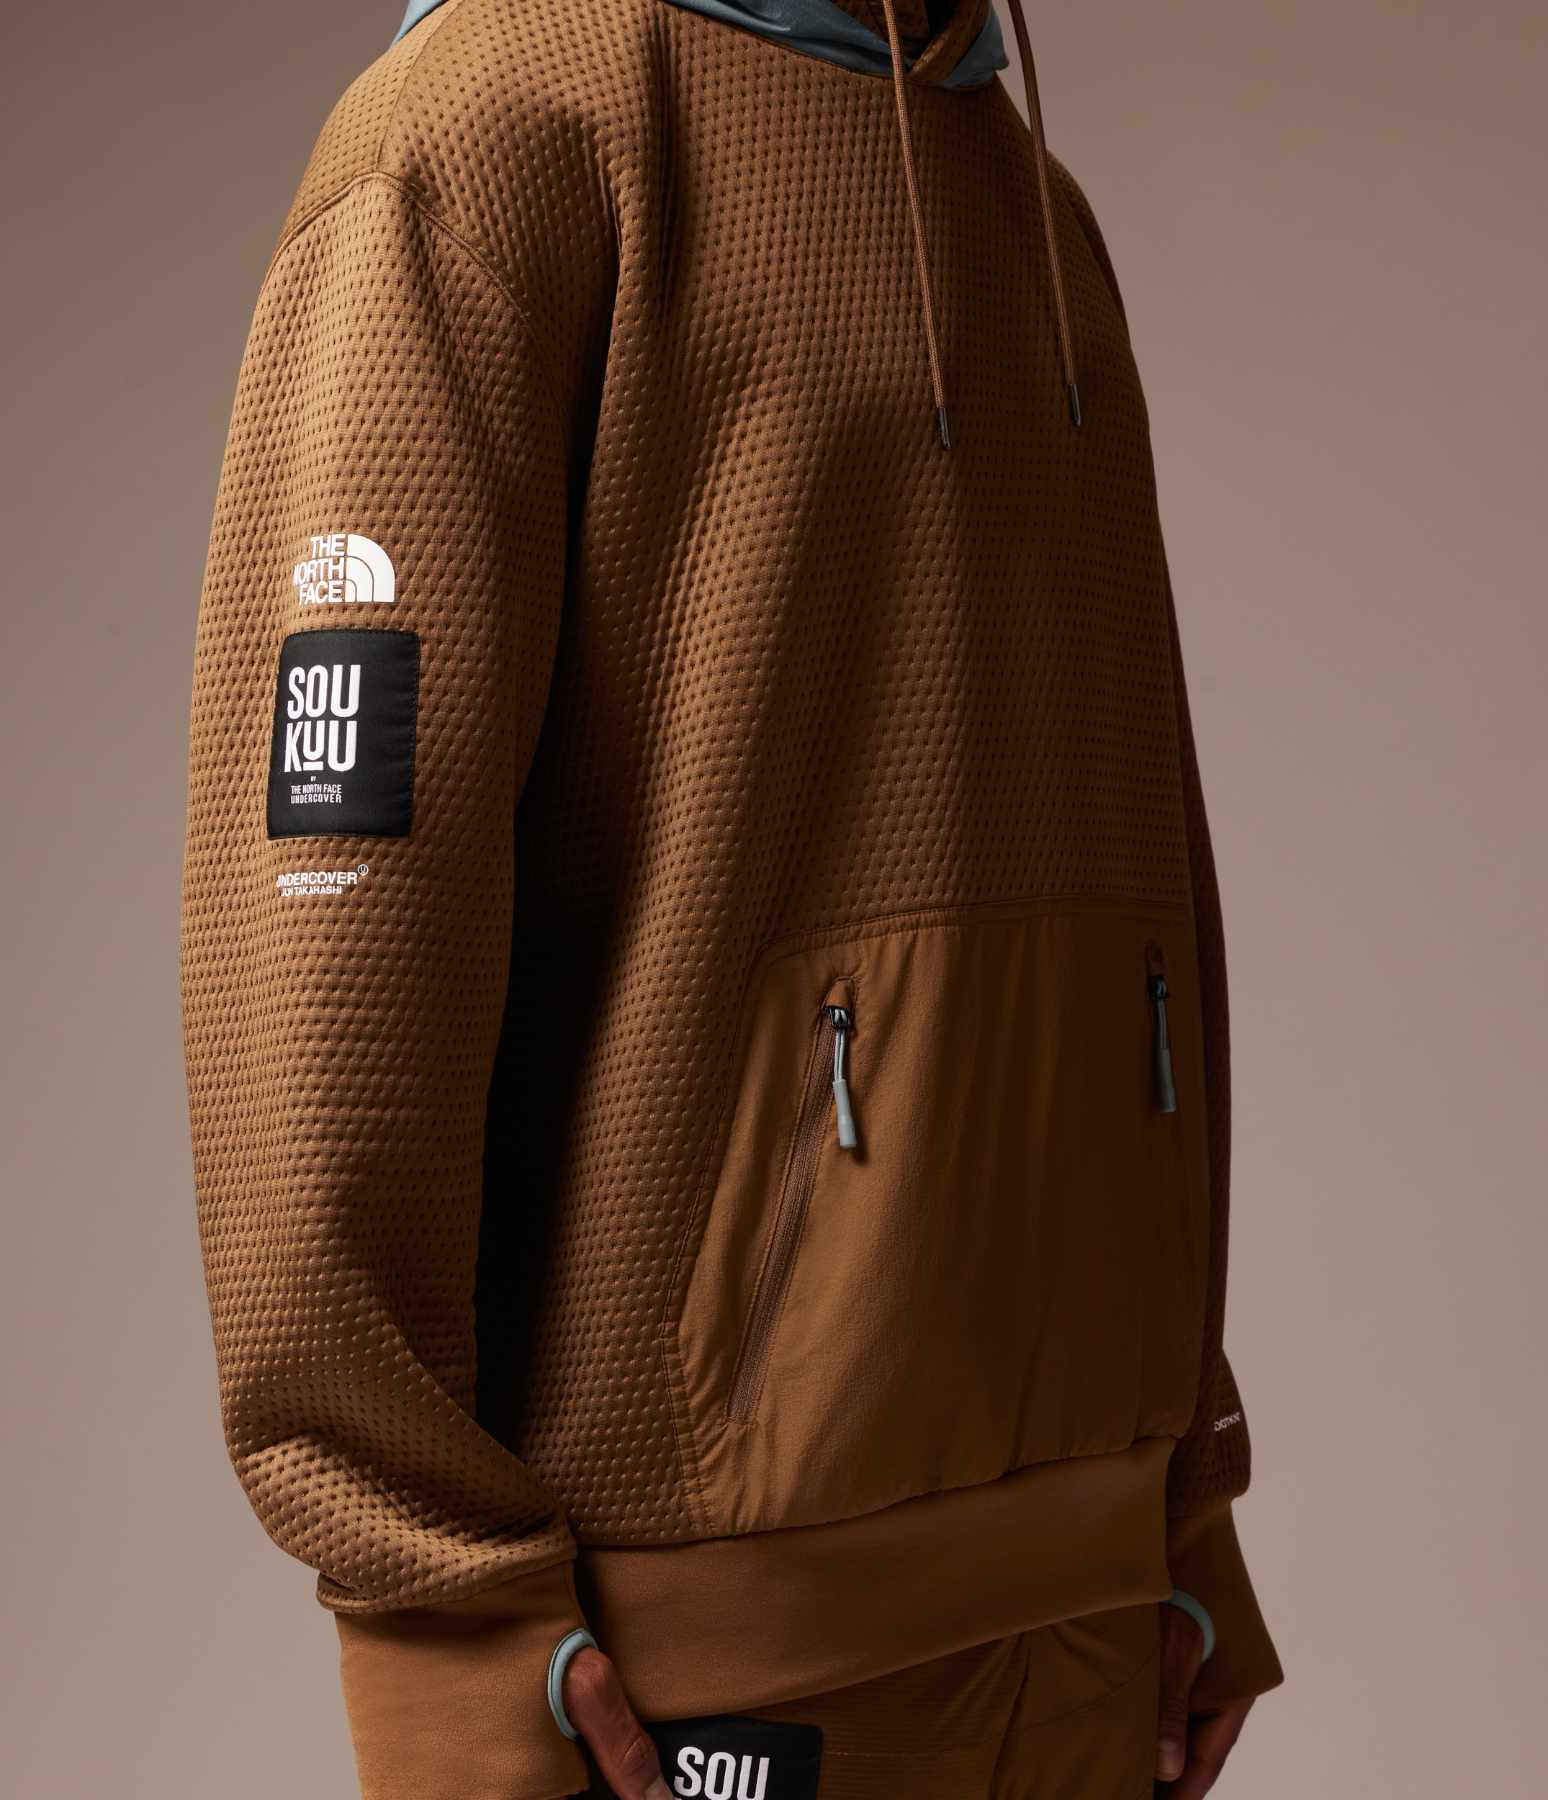 The North Face X Undercover Soukuu Hoodie in Brown for Men